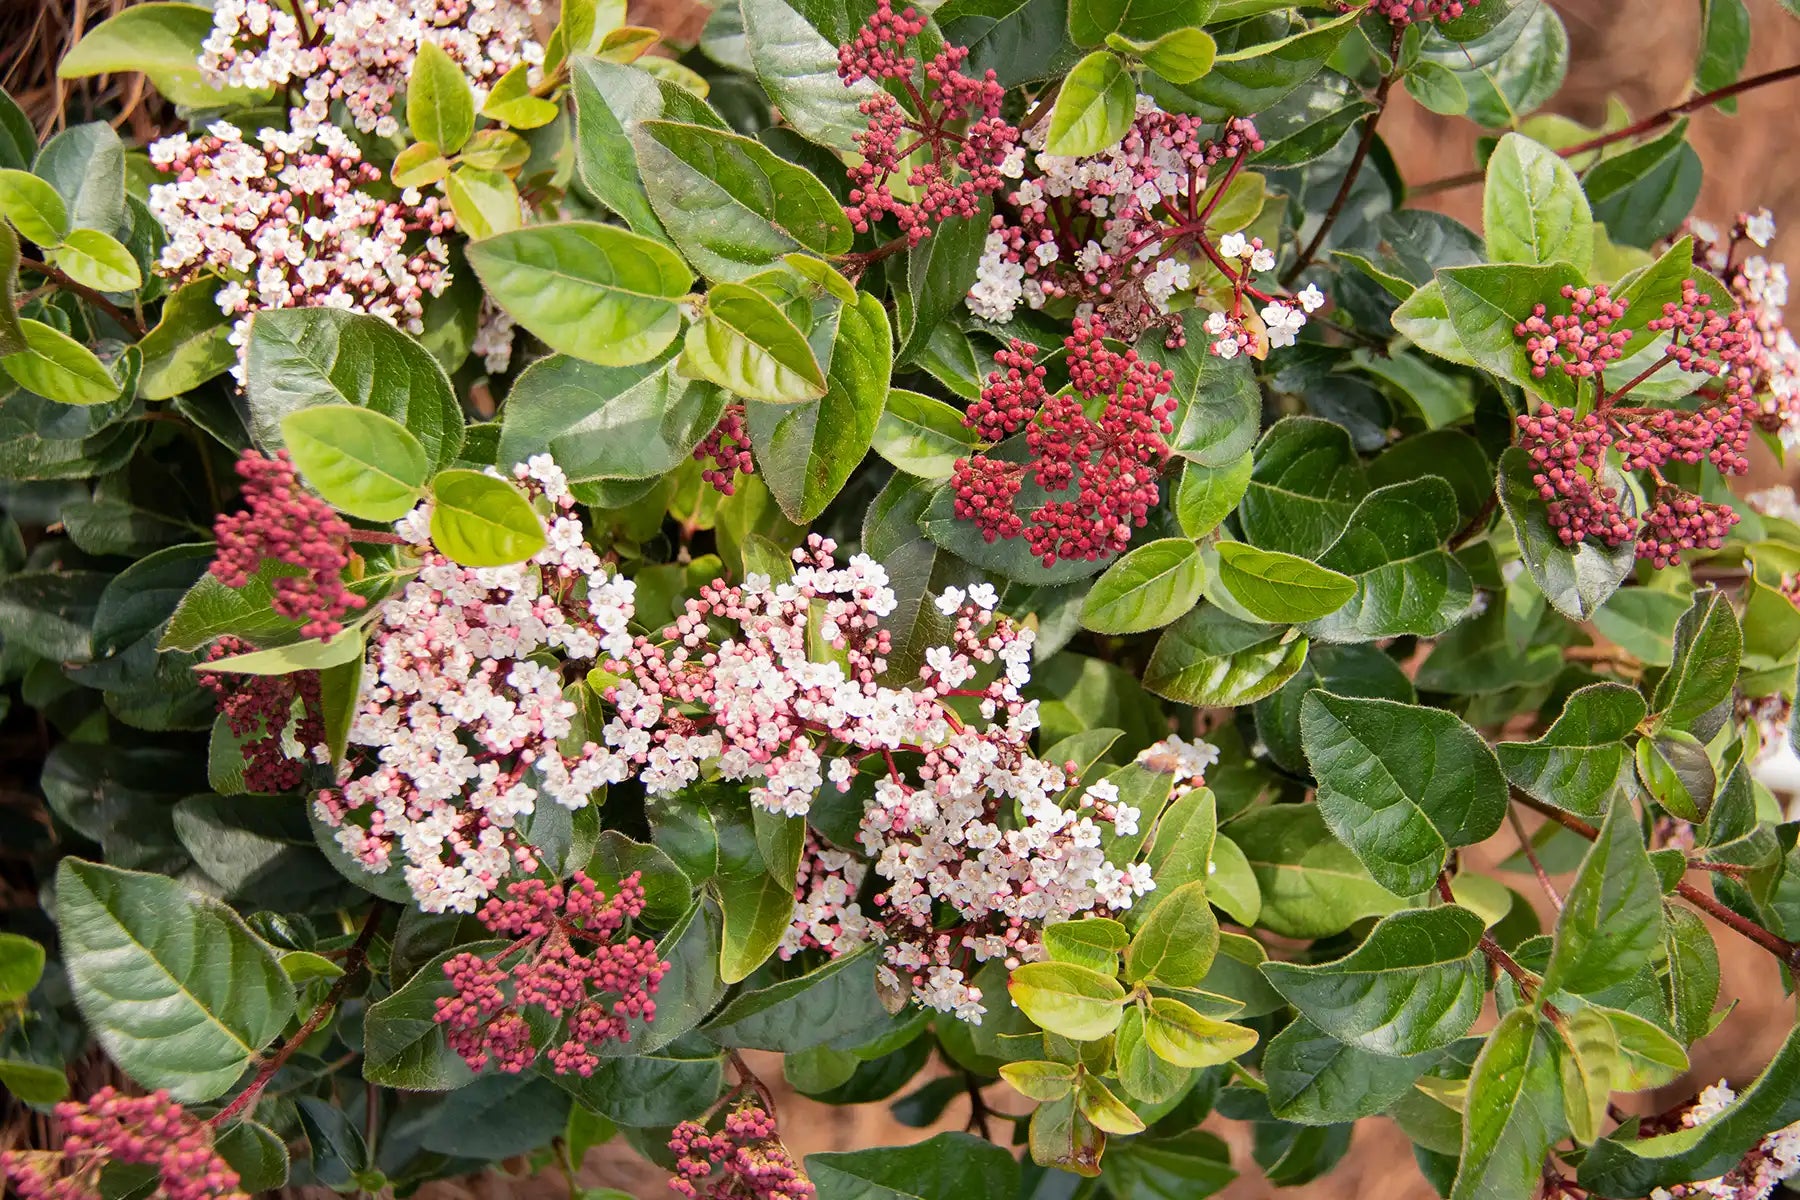 Blossoms and buds of Shades of Pink® Viburnum in closeup